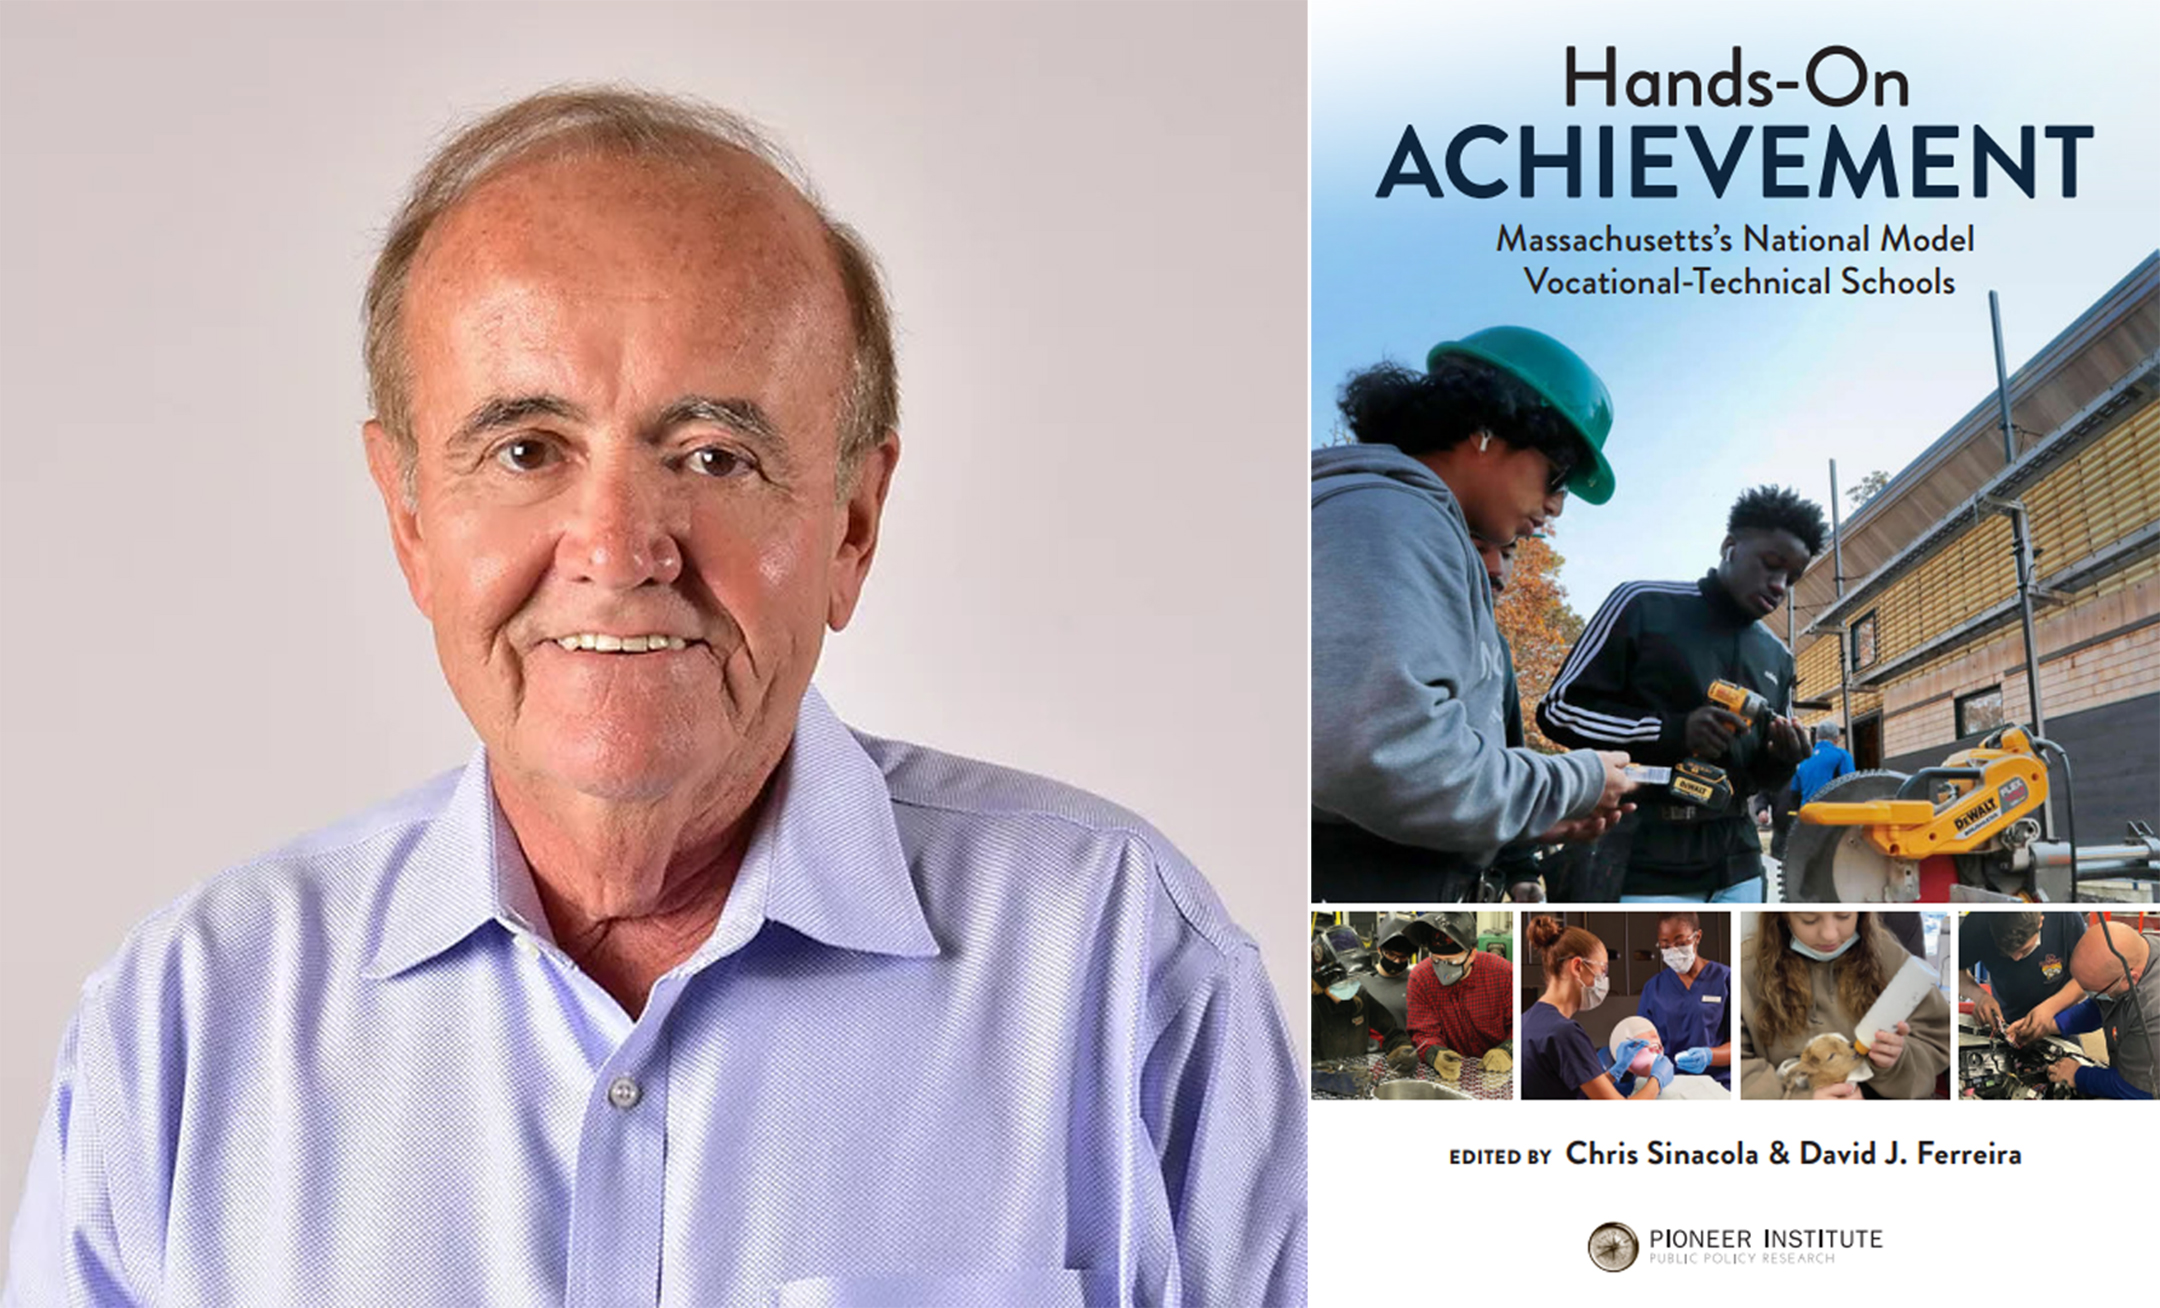 Photo of David J. Ferreira, left, and a cover of the book Hands-On Achievement, right